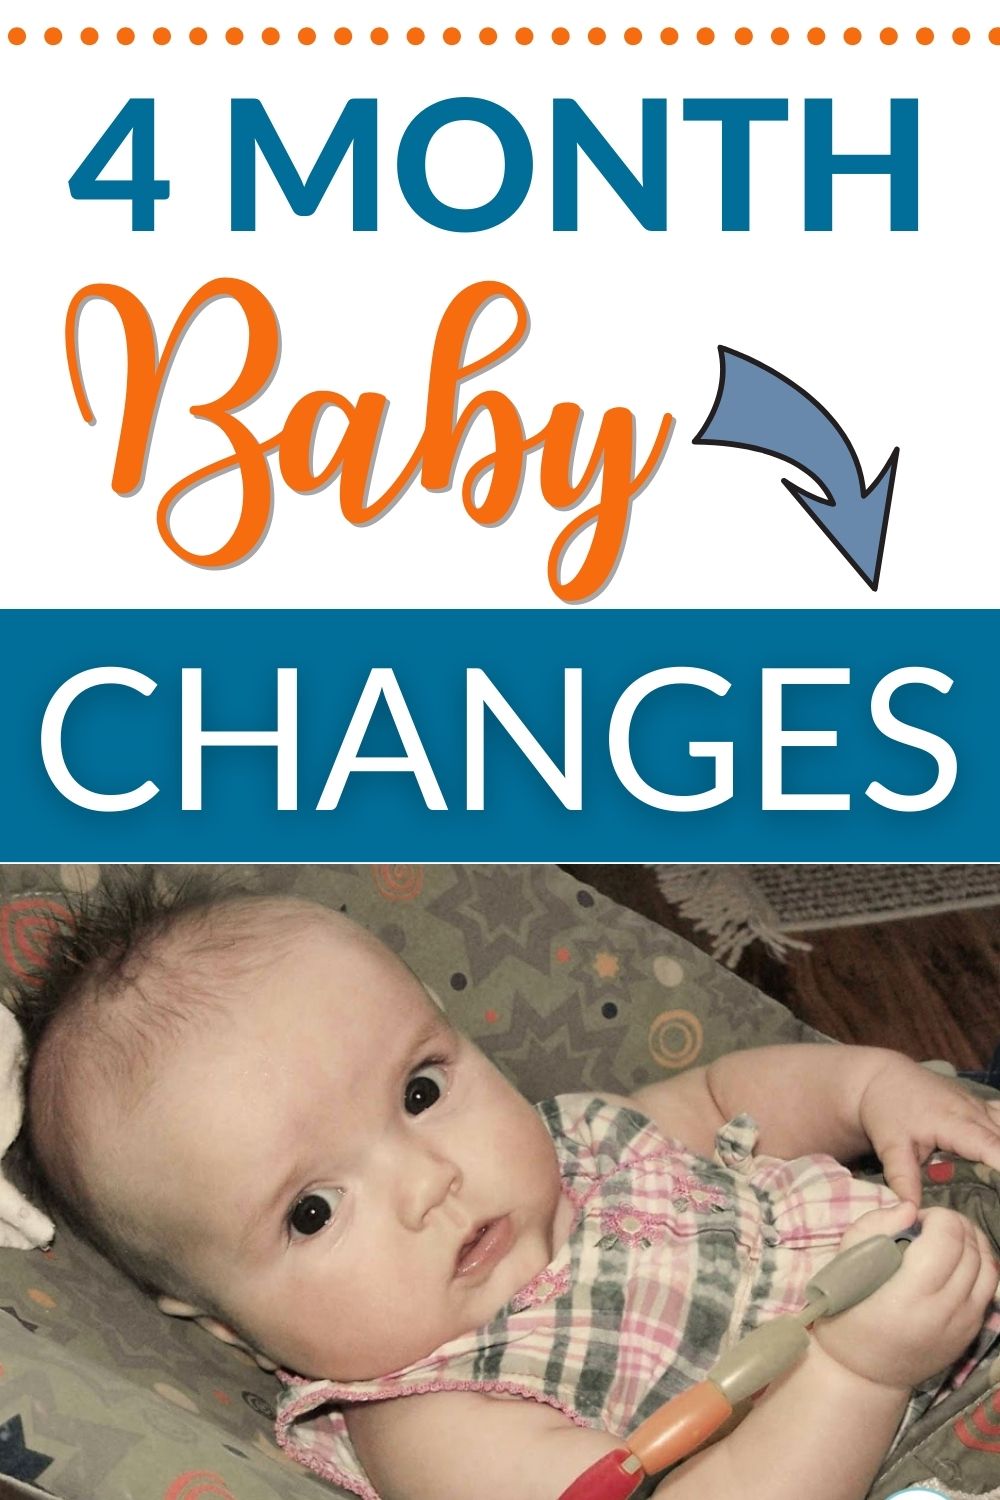 4 month baby changes pinnable image